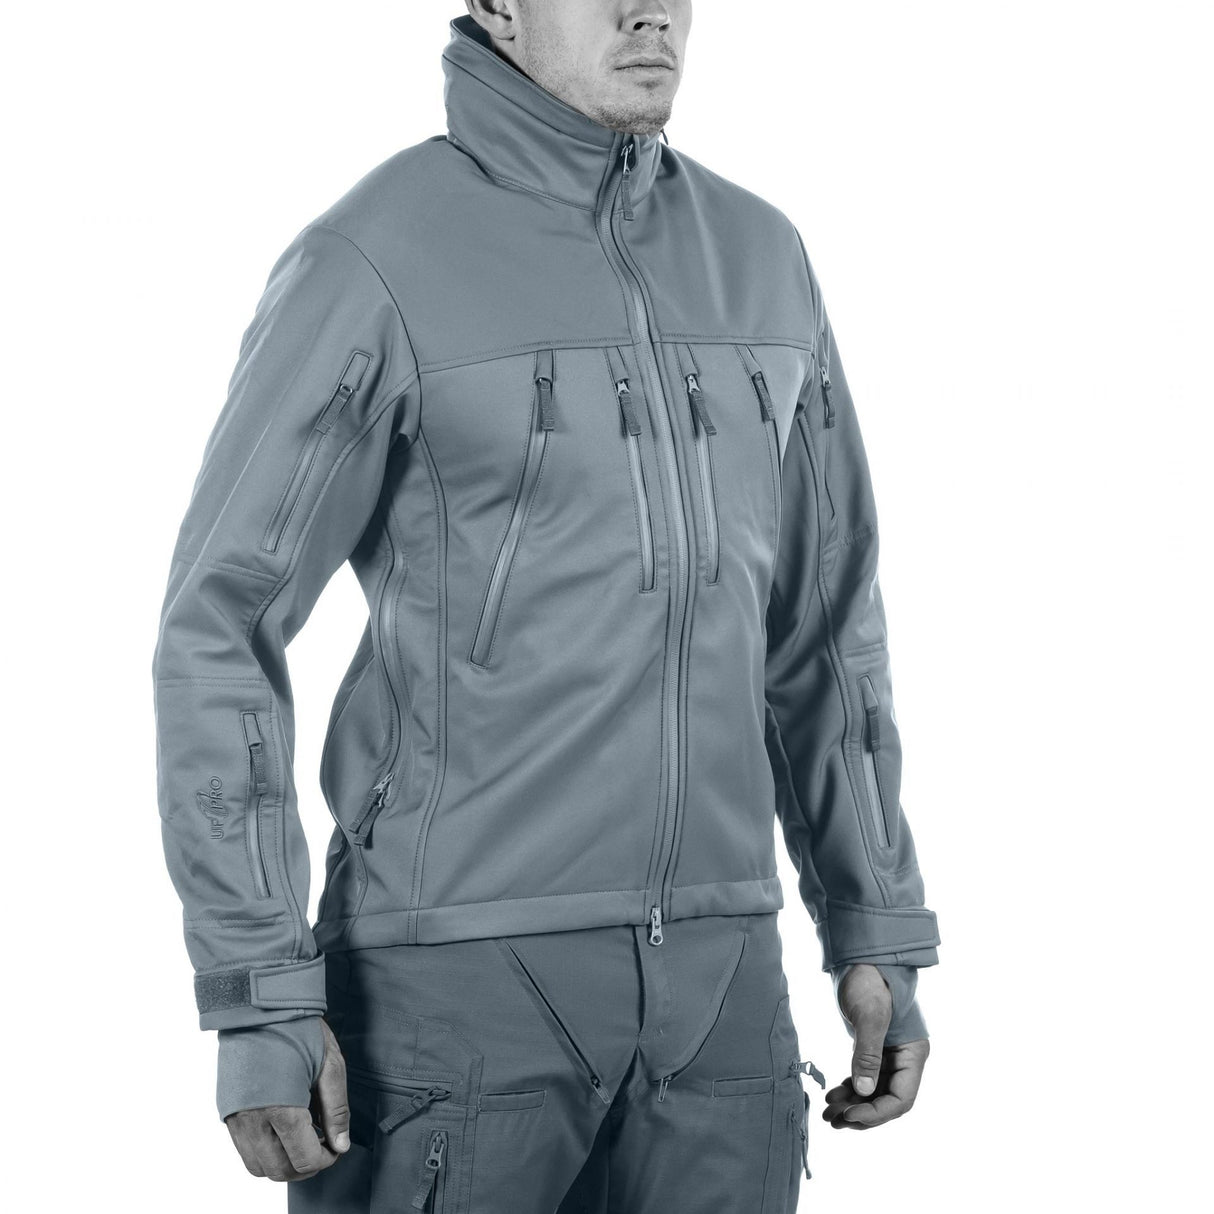 Tactical Softshell Wear: Stay warm and protected with Delta Eagle Gen.2 Softshell Jacket. ePTFE-based fabric, UF PRO® inserts, laminated zippers.